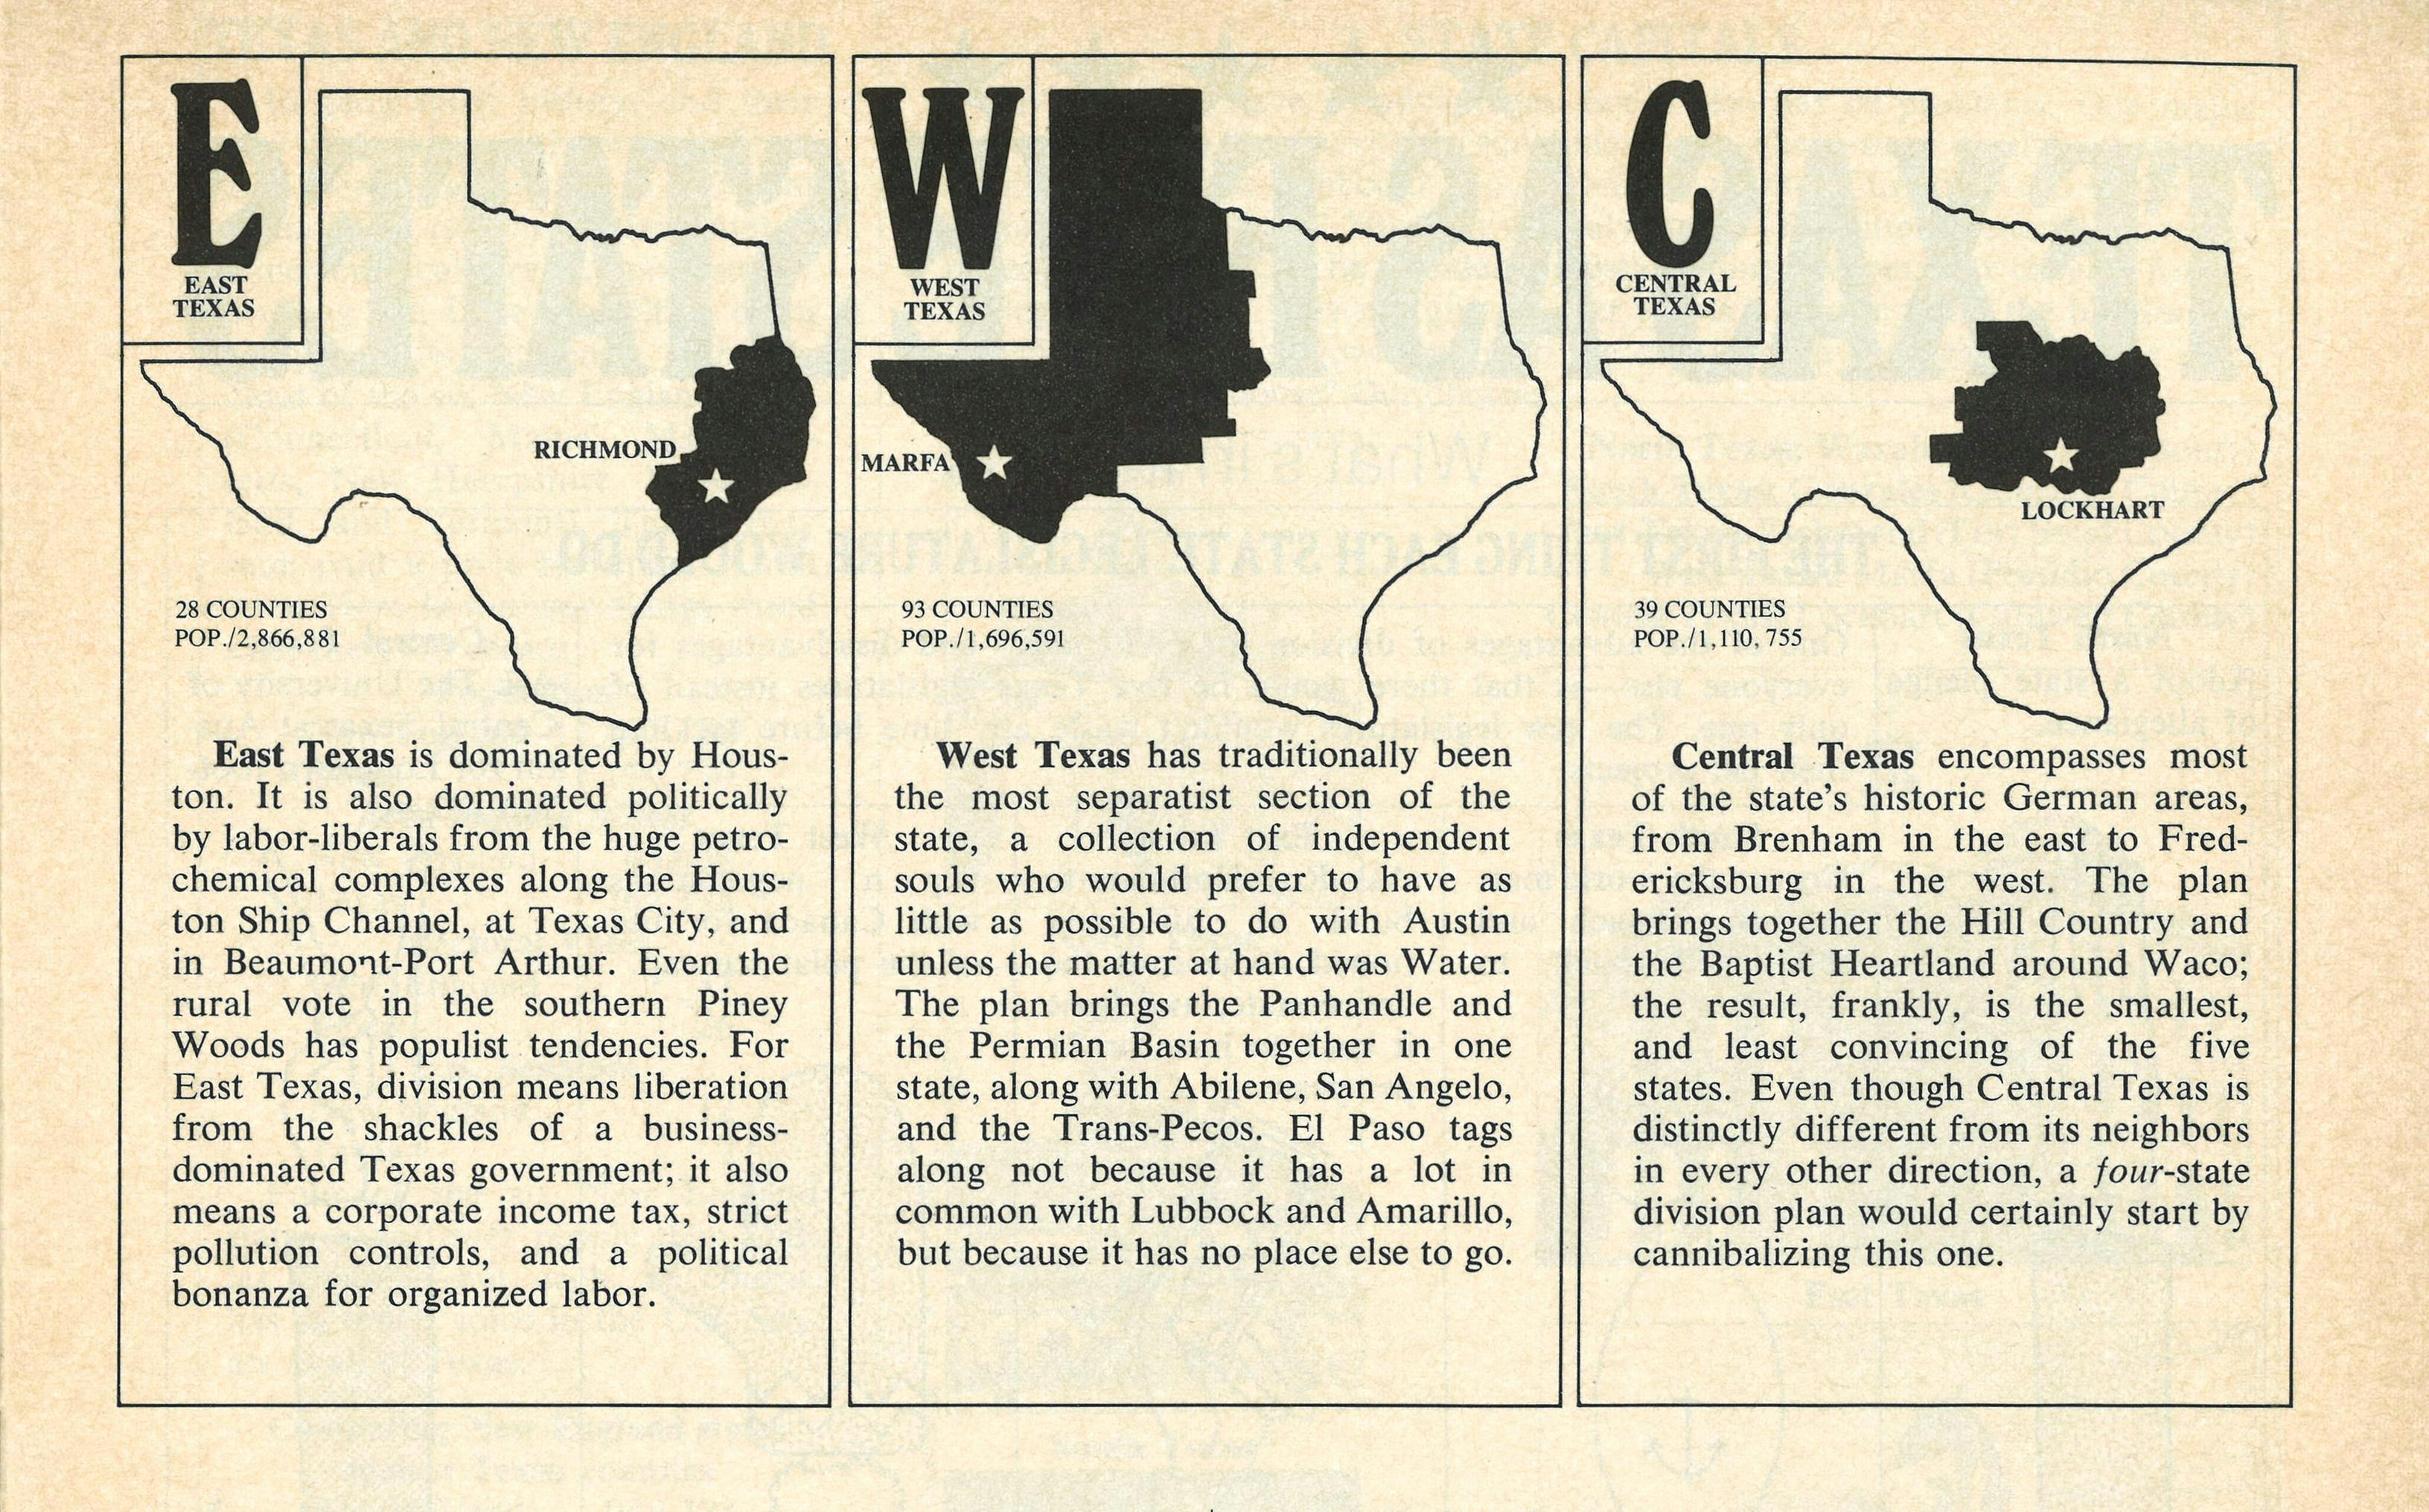 Descriptions of East Texas, West Texas, and Central Texas. 